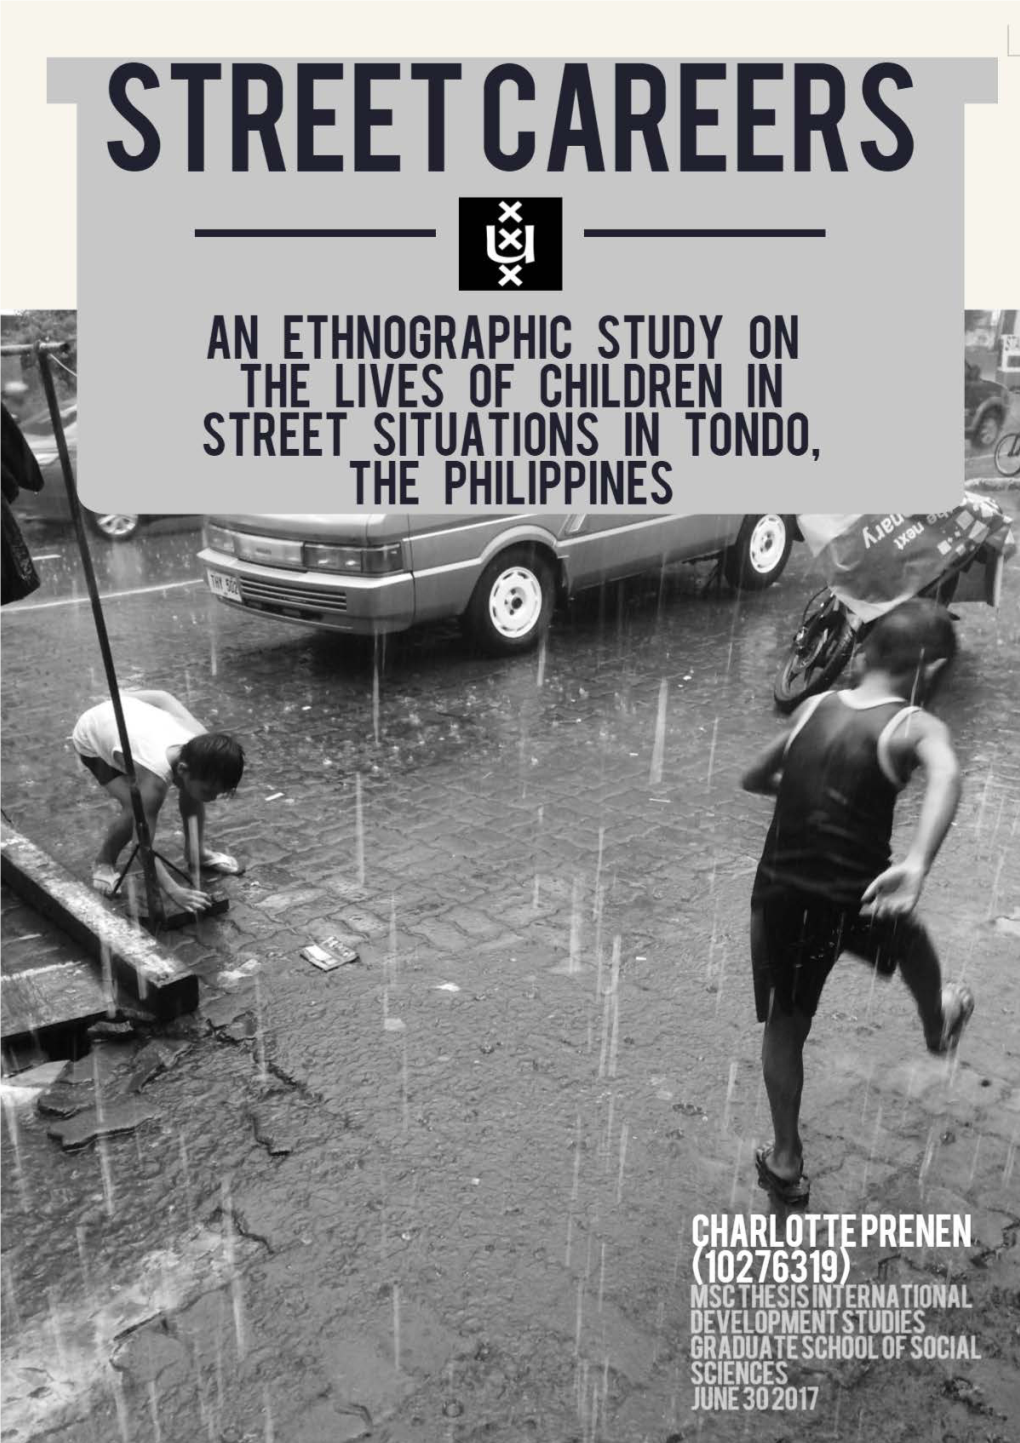 A Child-Centered Ethnographic Study on the Street Careers of Children in Tondo, Manila